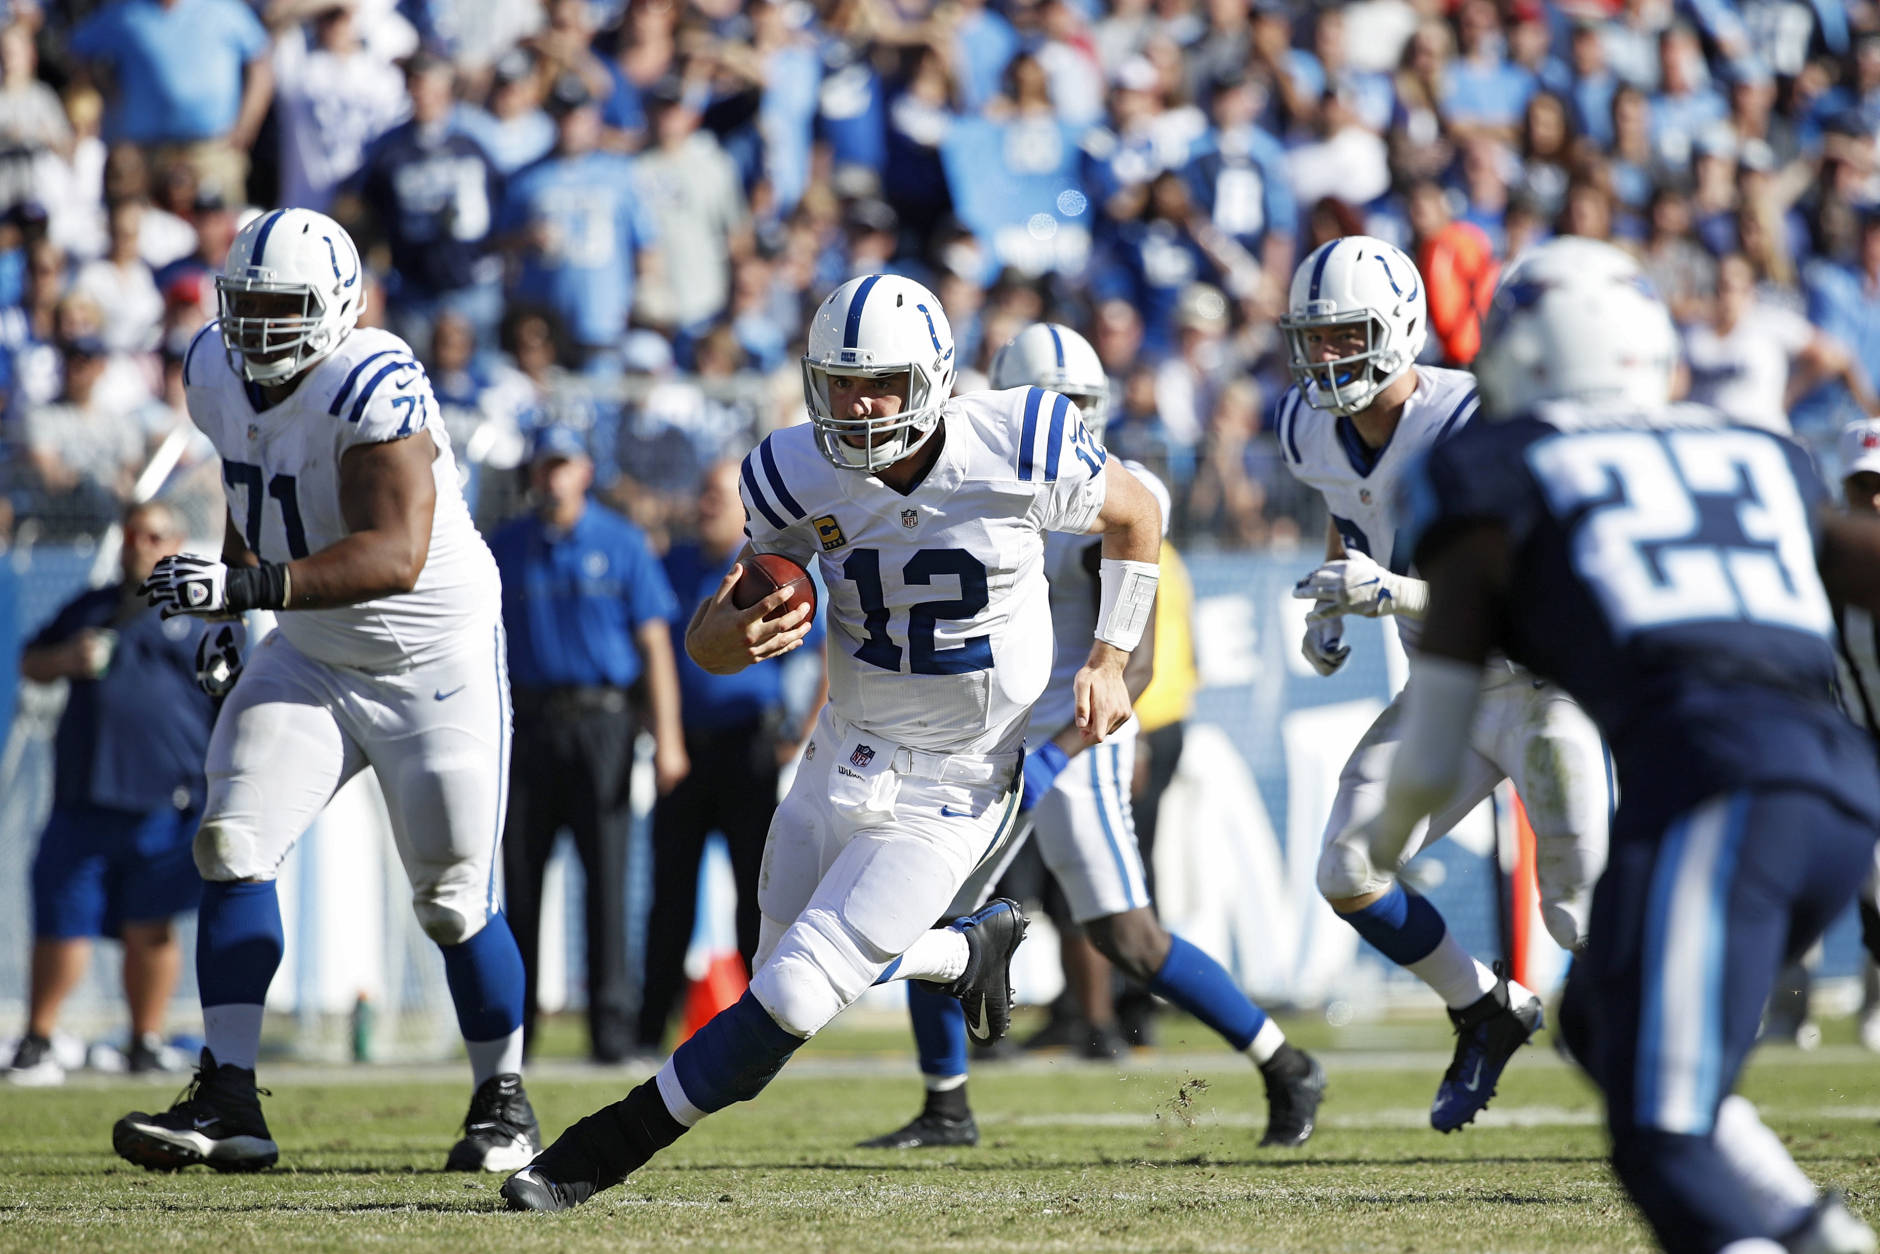 NASHVILLE, TN - OCTOBER 23: Andrew Luck #12 of the Indianapolis Colts runs with the ball against the Tennessee Titans in the fourth quarter of the game at Nissan Stadium on October 23, 2016 in Nashville, Tennessee. The Colts defeated the Titans 34-26. (Photo by Joe Robbins/Getty Images)